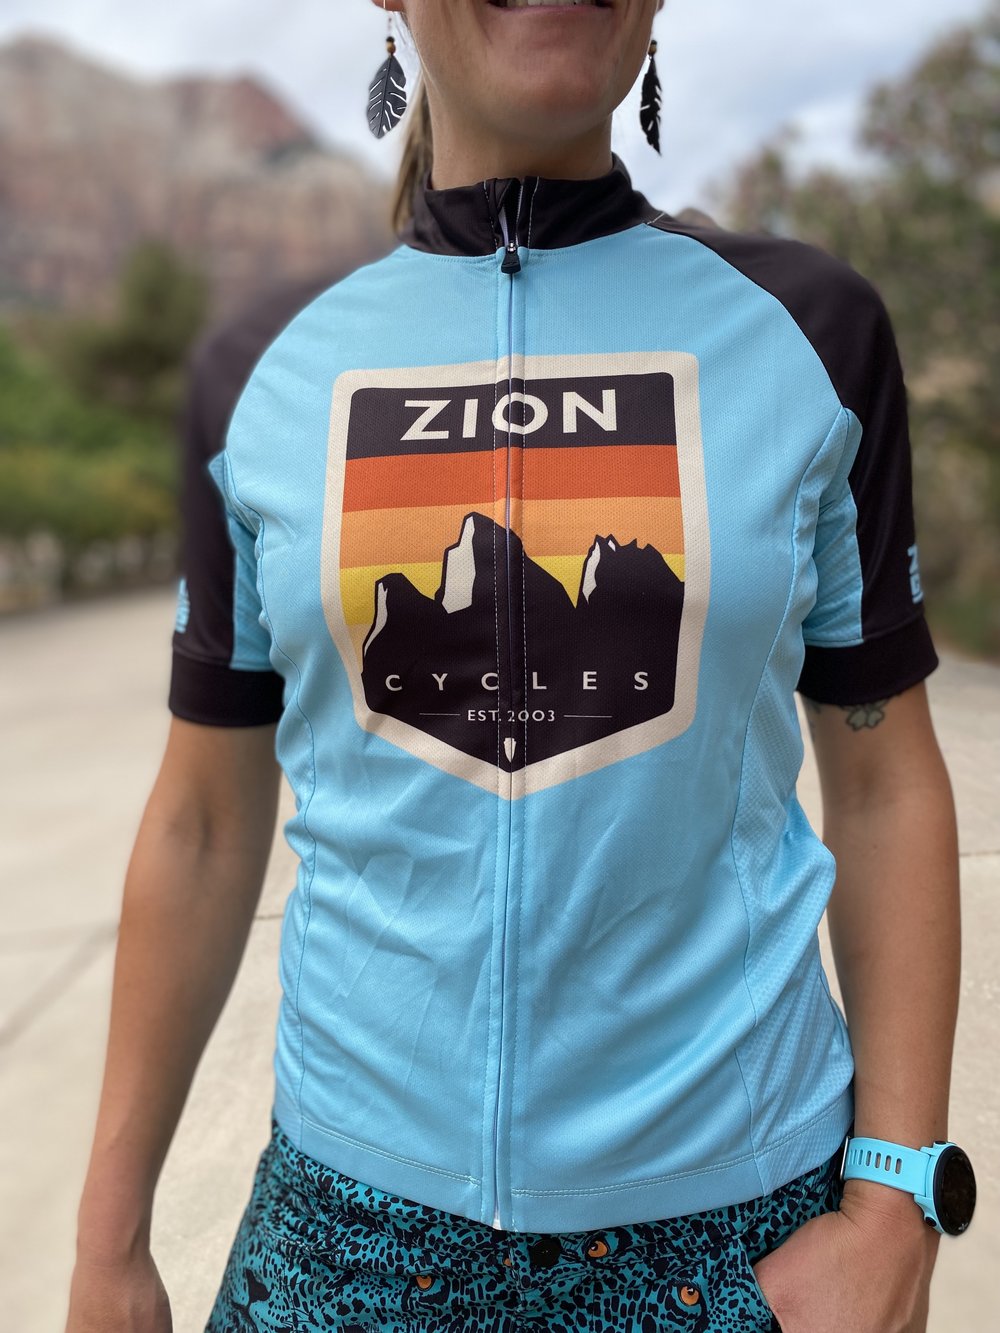 Zion Cycles Blue Women's Cycling Jersey For Sale — ZION CYCLES